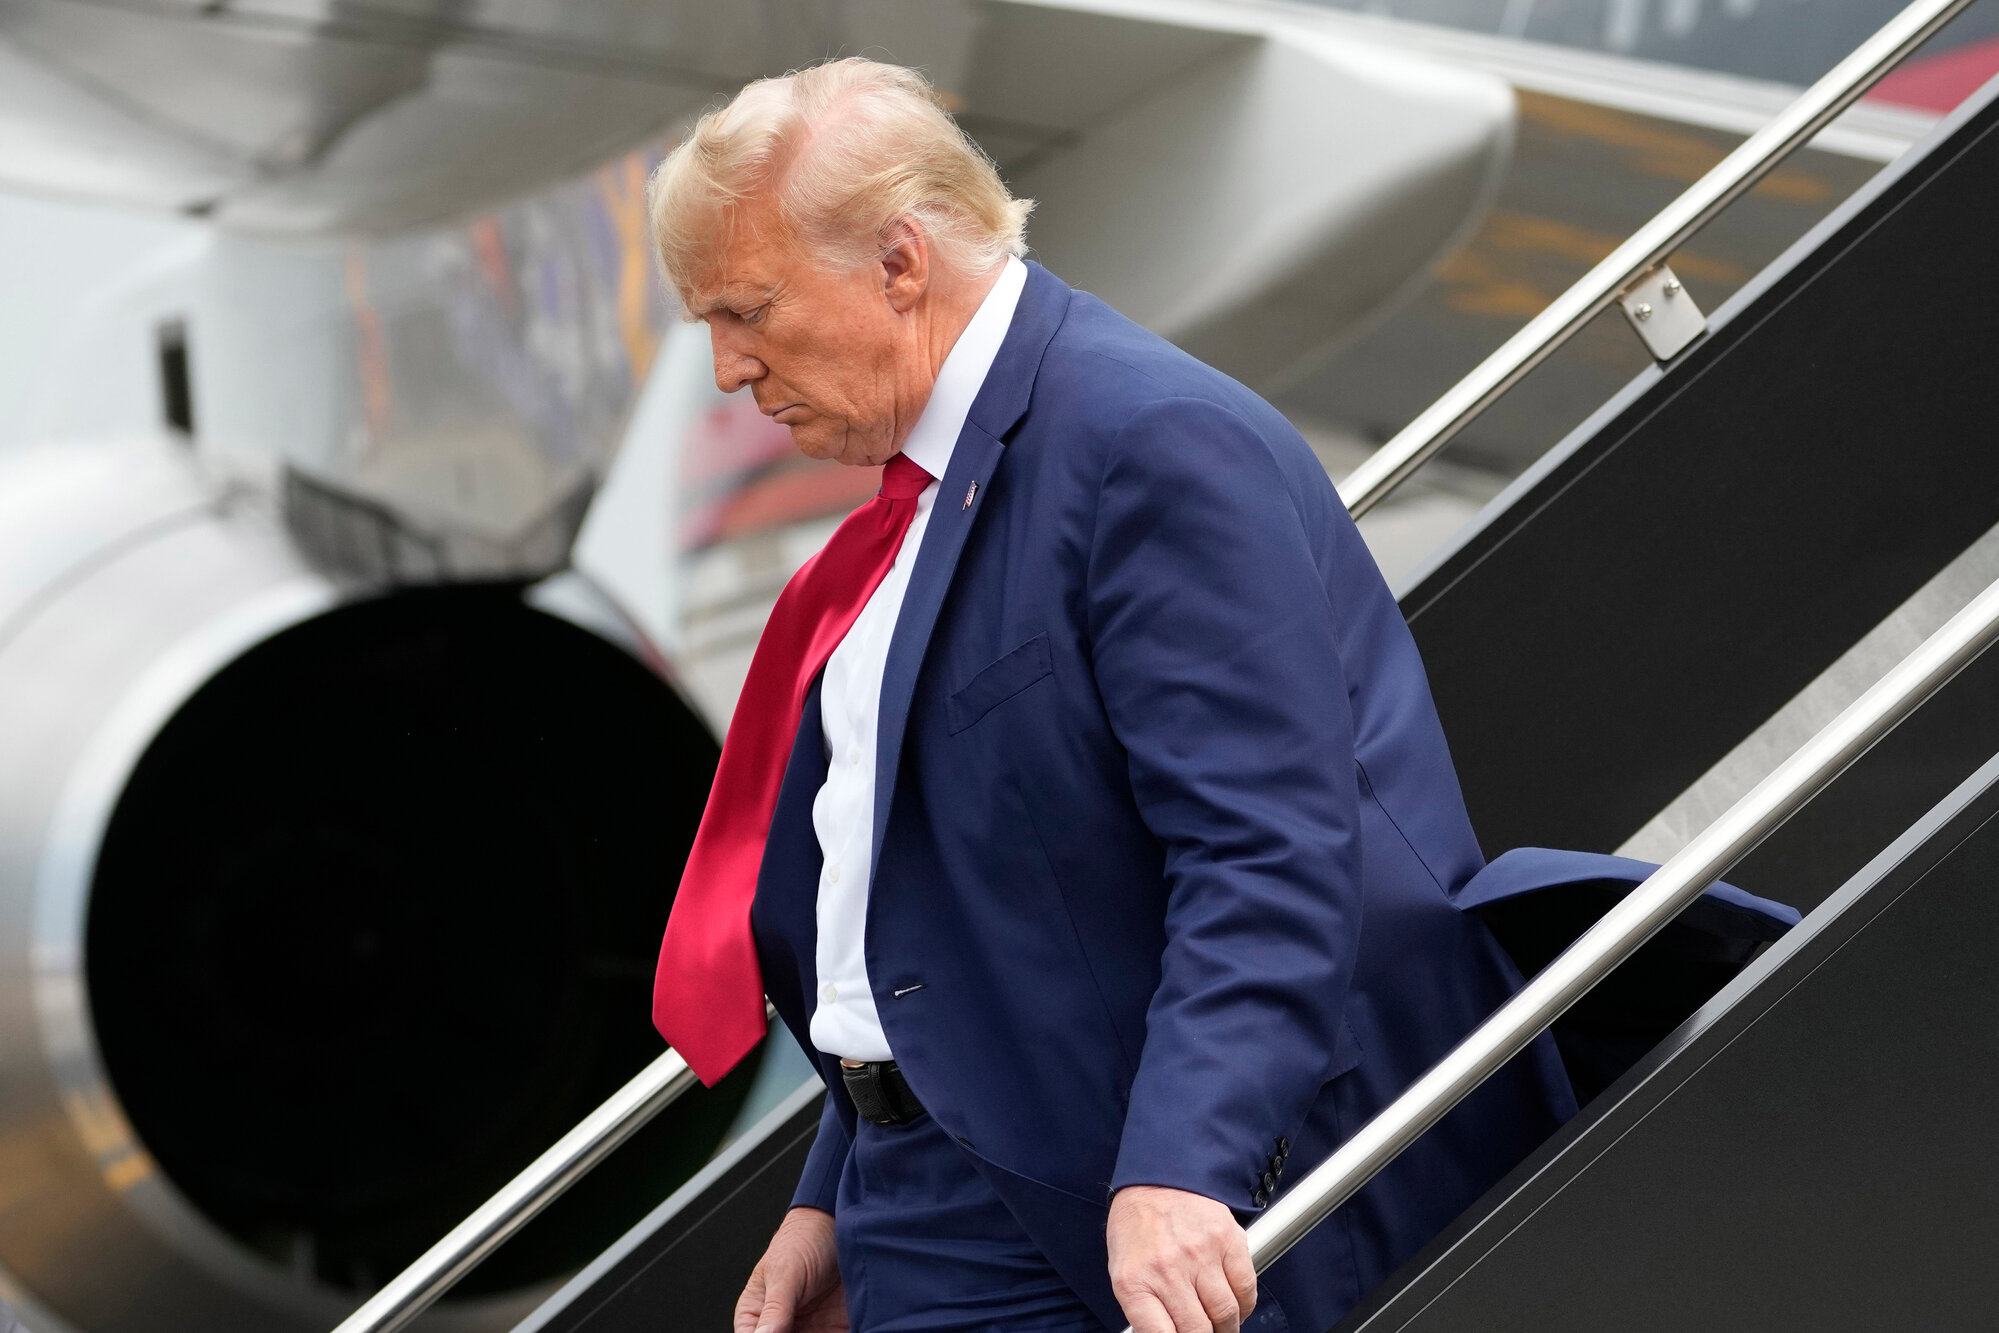 Former President Donald Trump arrives at Ronald Reagan Washington National Airport, Thursday, Aug. 3, 2023, in Arlington, Va., as he headed to Washington to face a judge on federal conspiracy charges alleging Trump conspired to subvert the 2020 election. Trump pleaded not guilty.